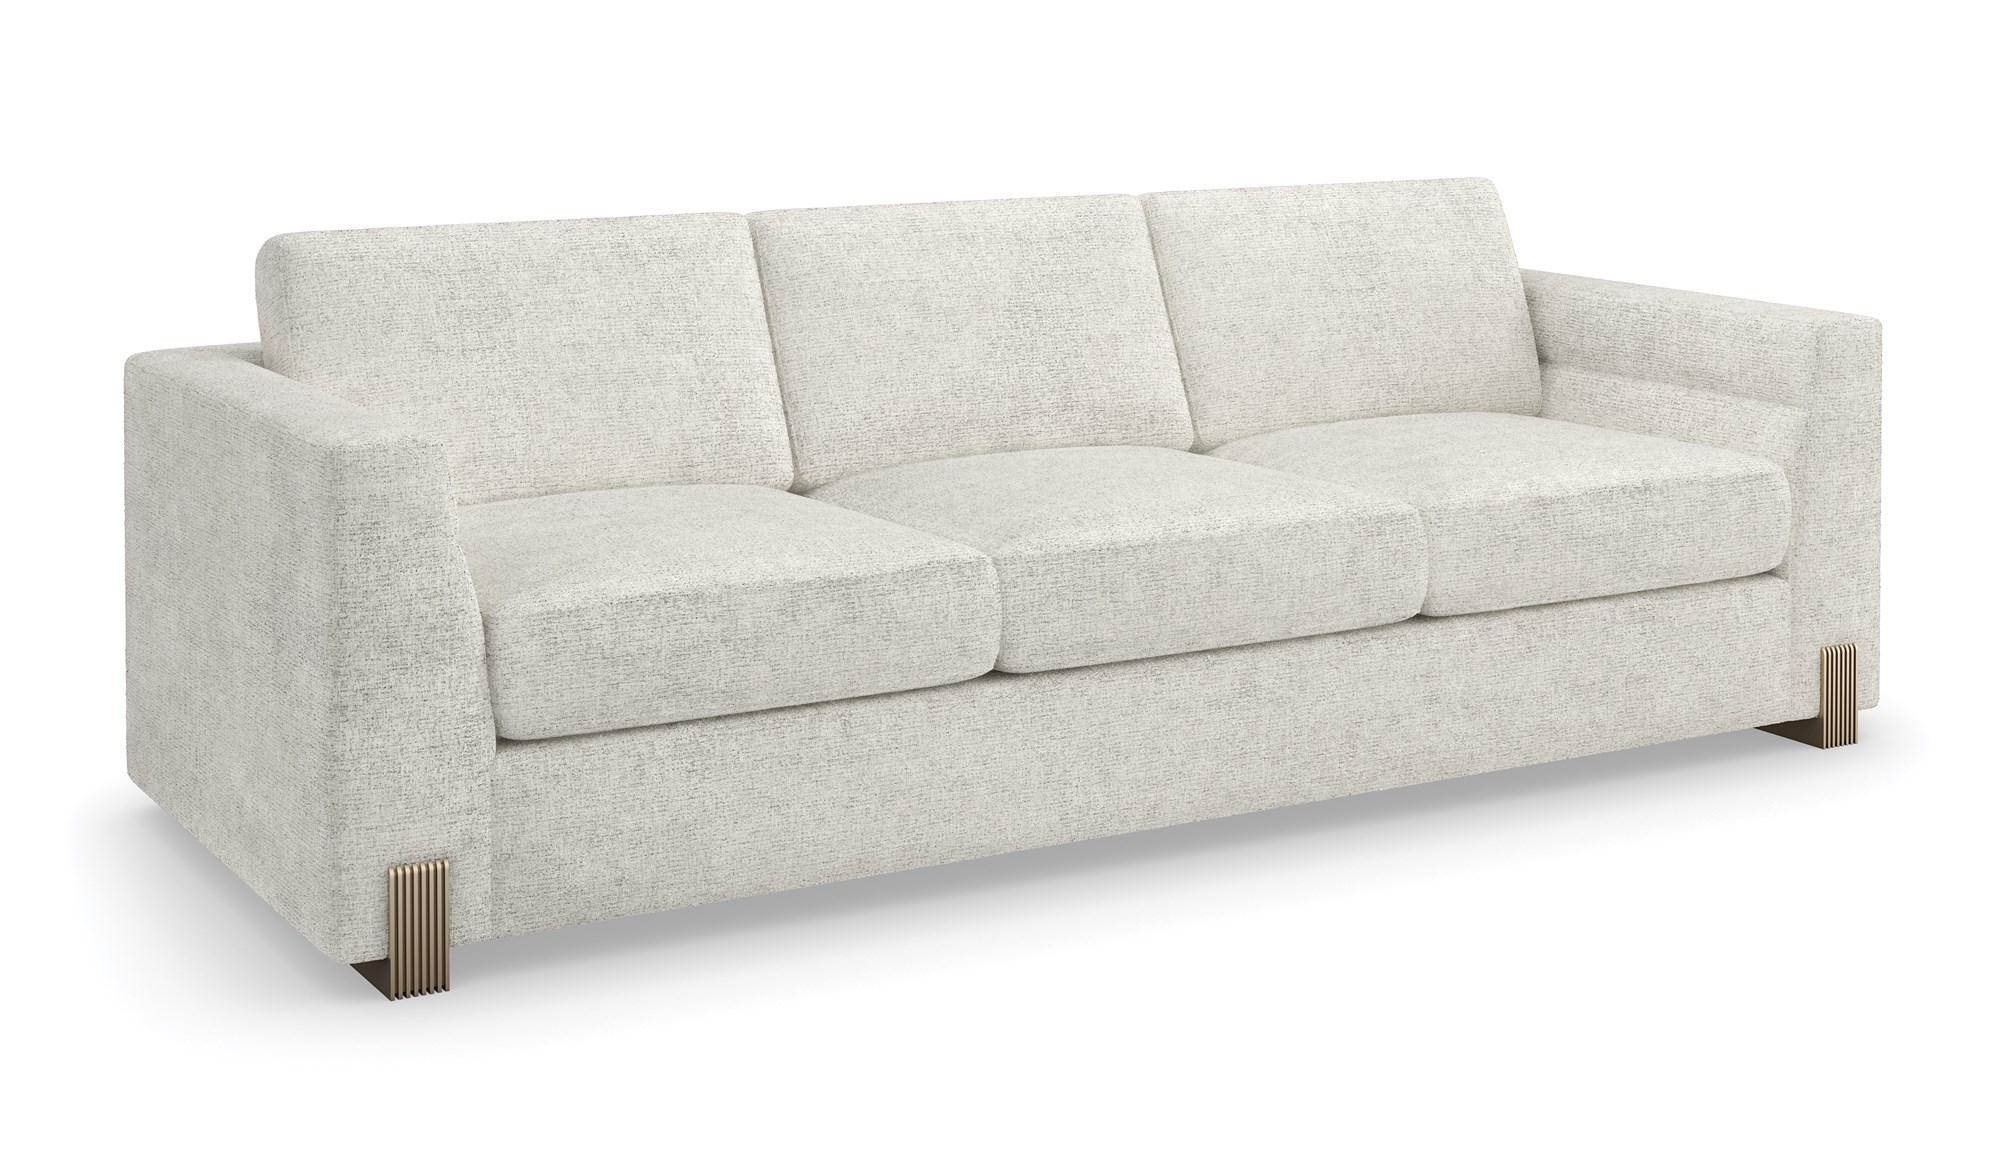 Contemporary Sofa COUNTER BALANCE SOFA UPH-022-012-A in Oatmeal, Champagne Fabric